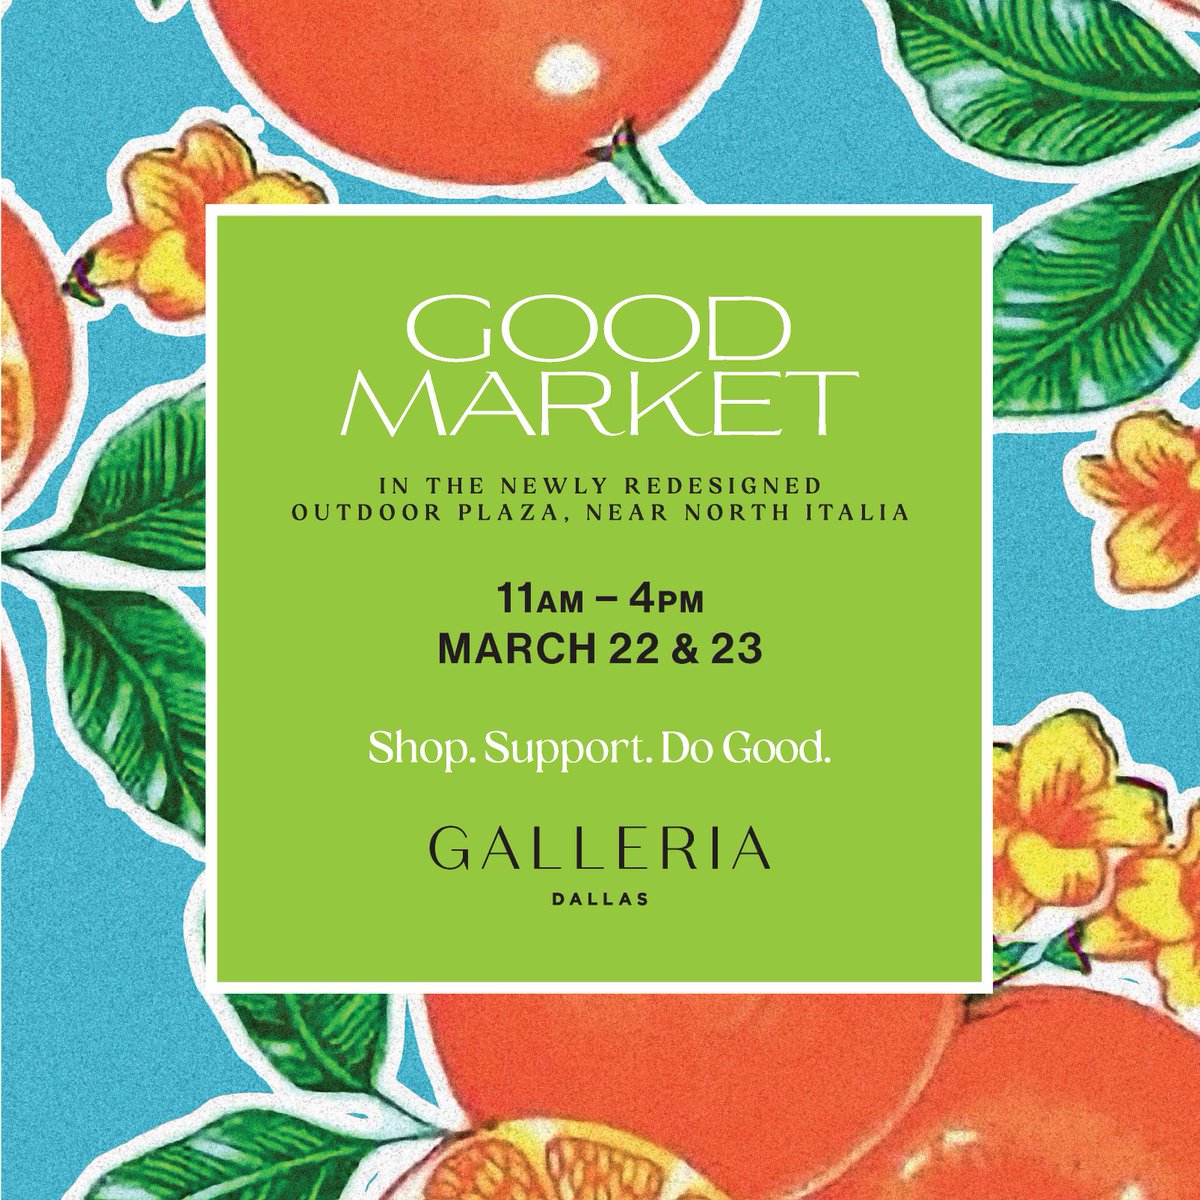 Good Market is right around the corner! Stop by from 11am-4pm on March 22 & 23 in our new Outdoor Plaza to shop products from unique local vendors and enjoy tasty bites from North Italia! 10% of sales from Good Market will be donated to @dallasarboretum, as our March partner. 🌸